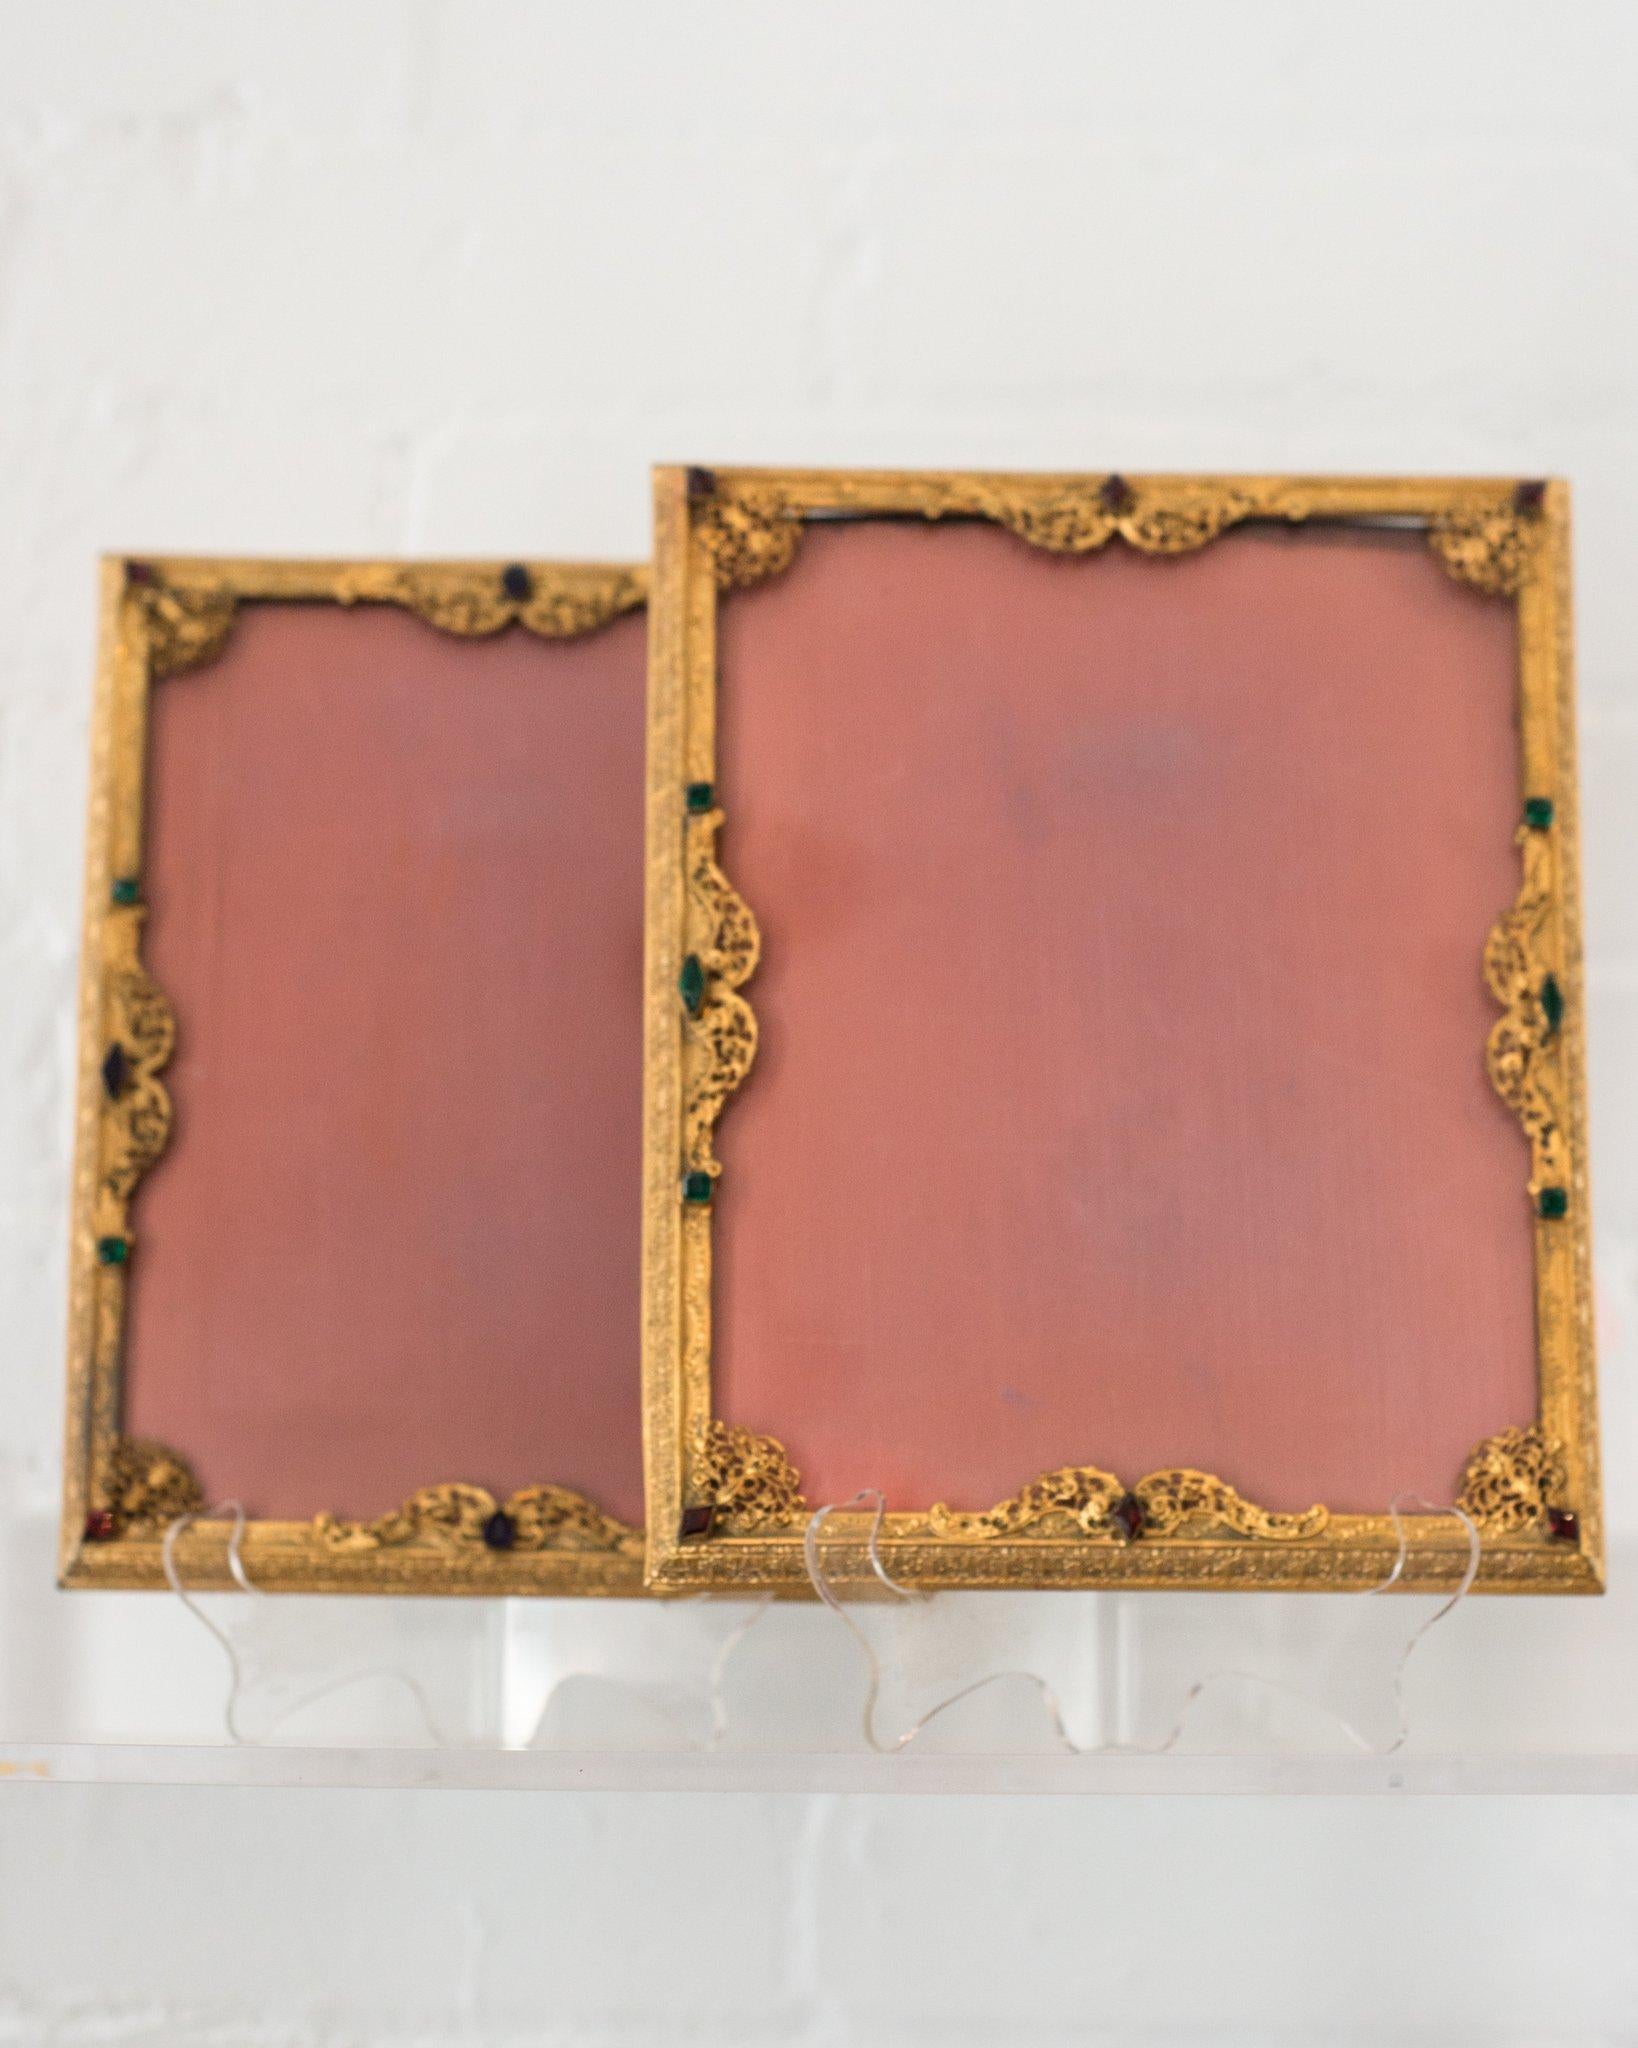 A pair of French antique gold picture frames with filigree work and jewels backed in pink silk. This frame is as precious as the memory you may fill it with. Fits a 7